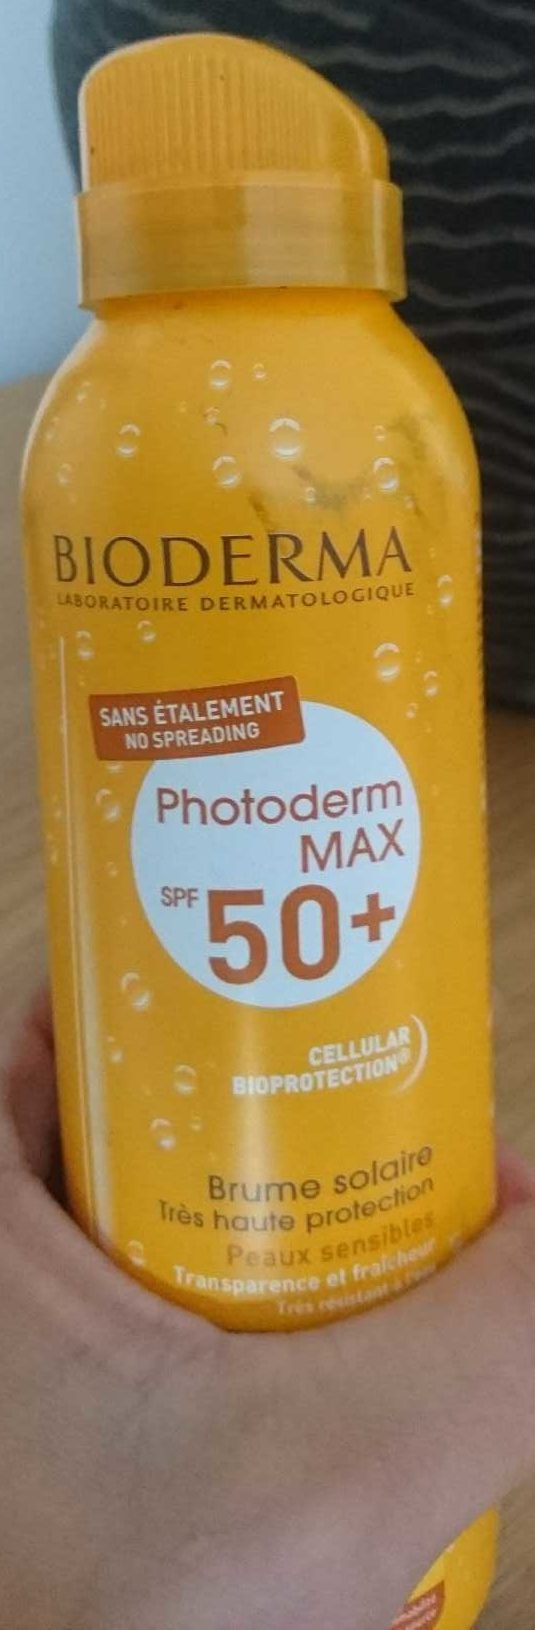 Photoderm max spf50+ - Product - fr